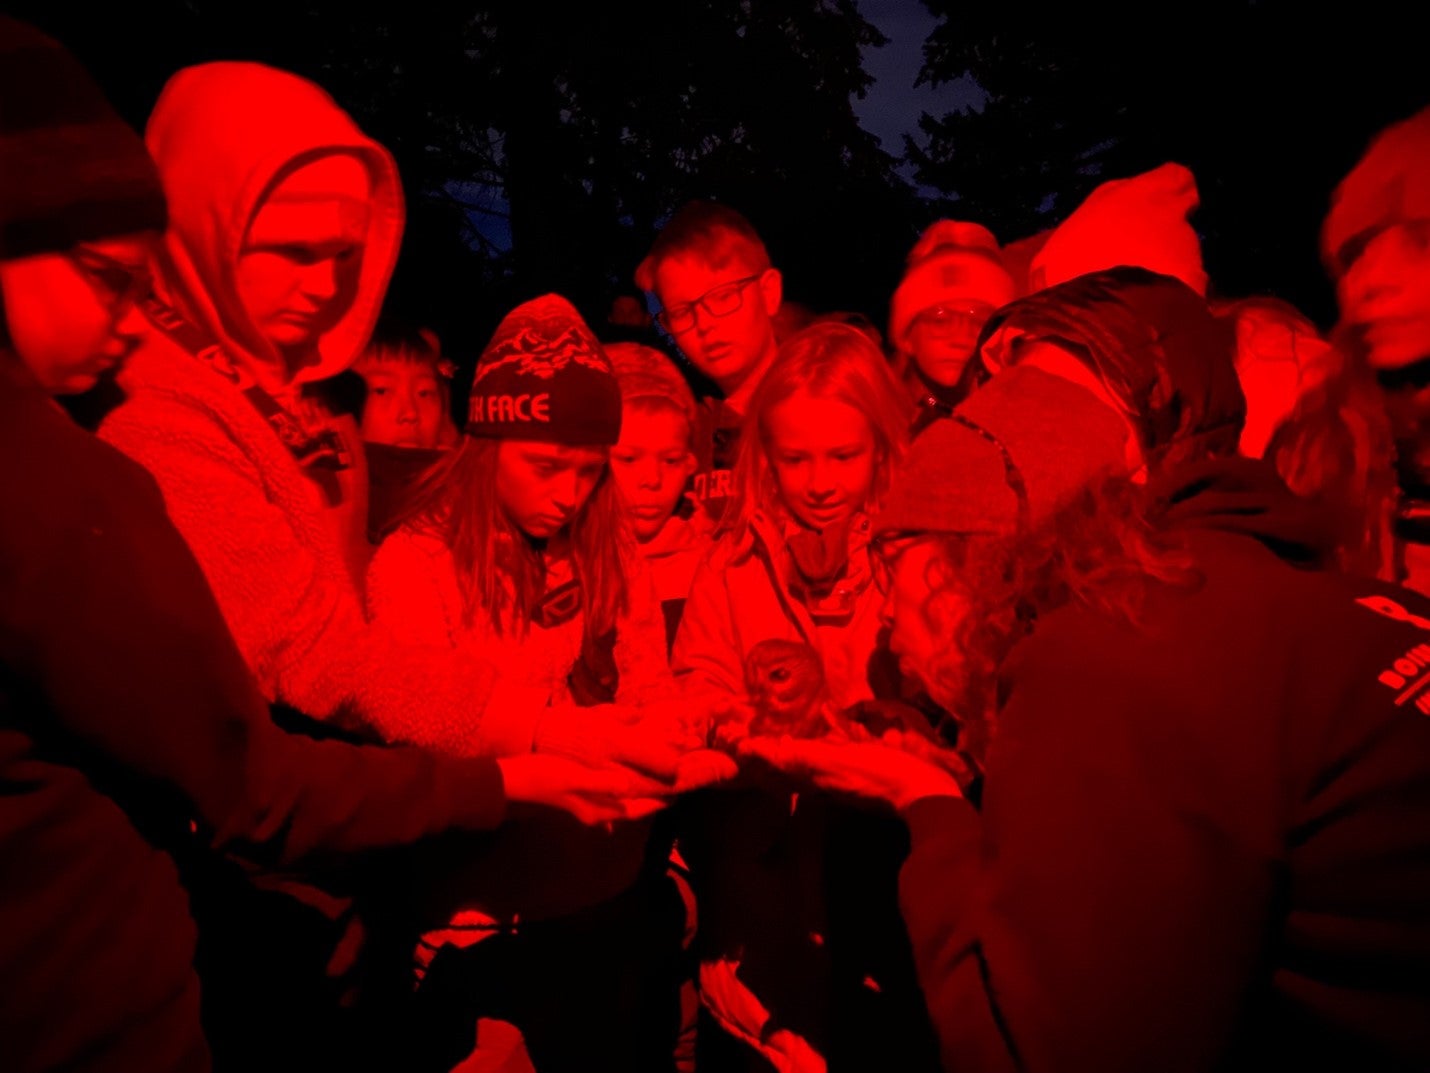 The photo is taken in red light and appears all black and red. about ten students gather around with outstretched hands held together to make a platform. A tiny adorable saw whet owl sits perched on their hands as heather hayes leans in to help release it.